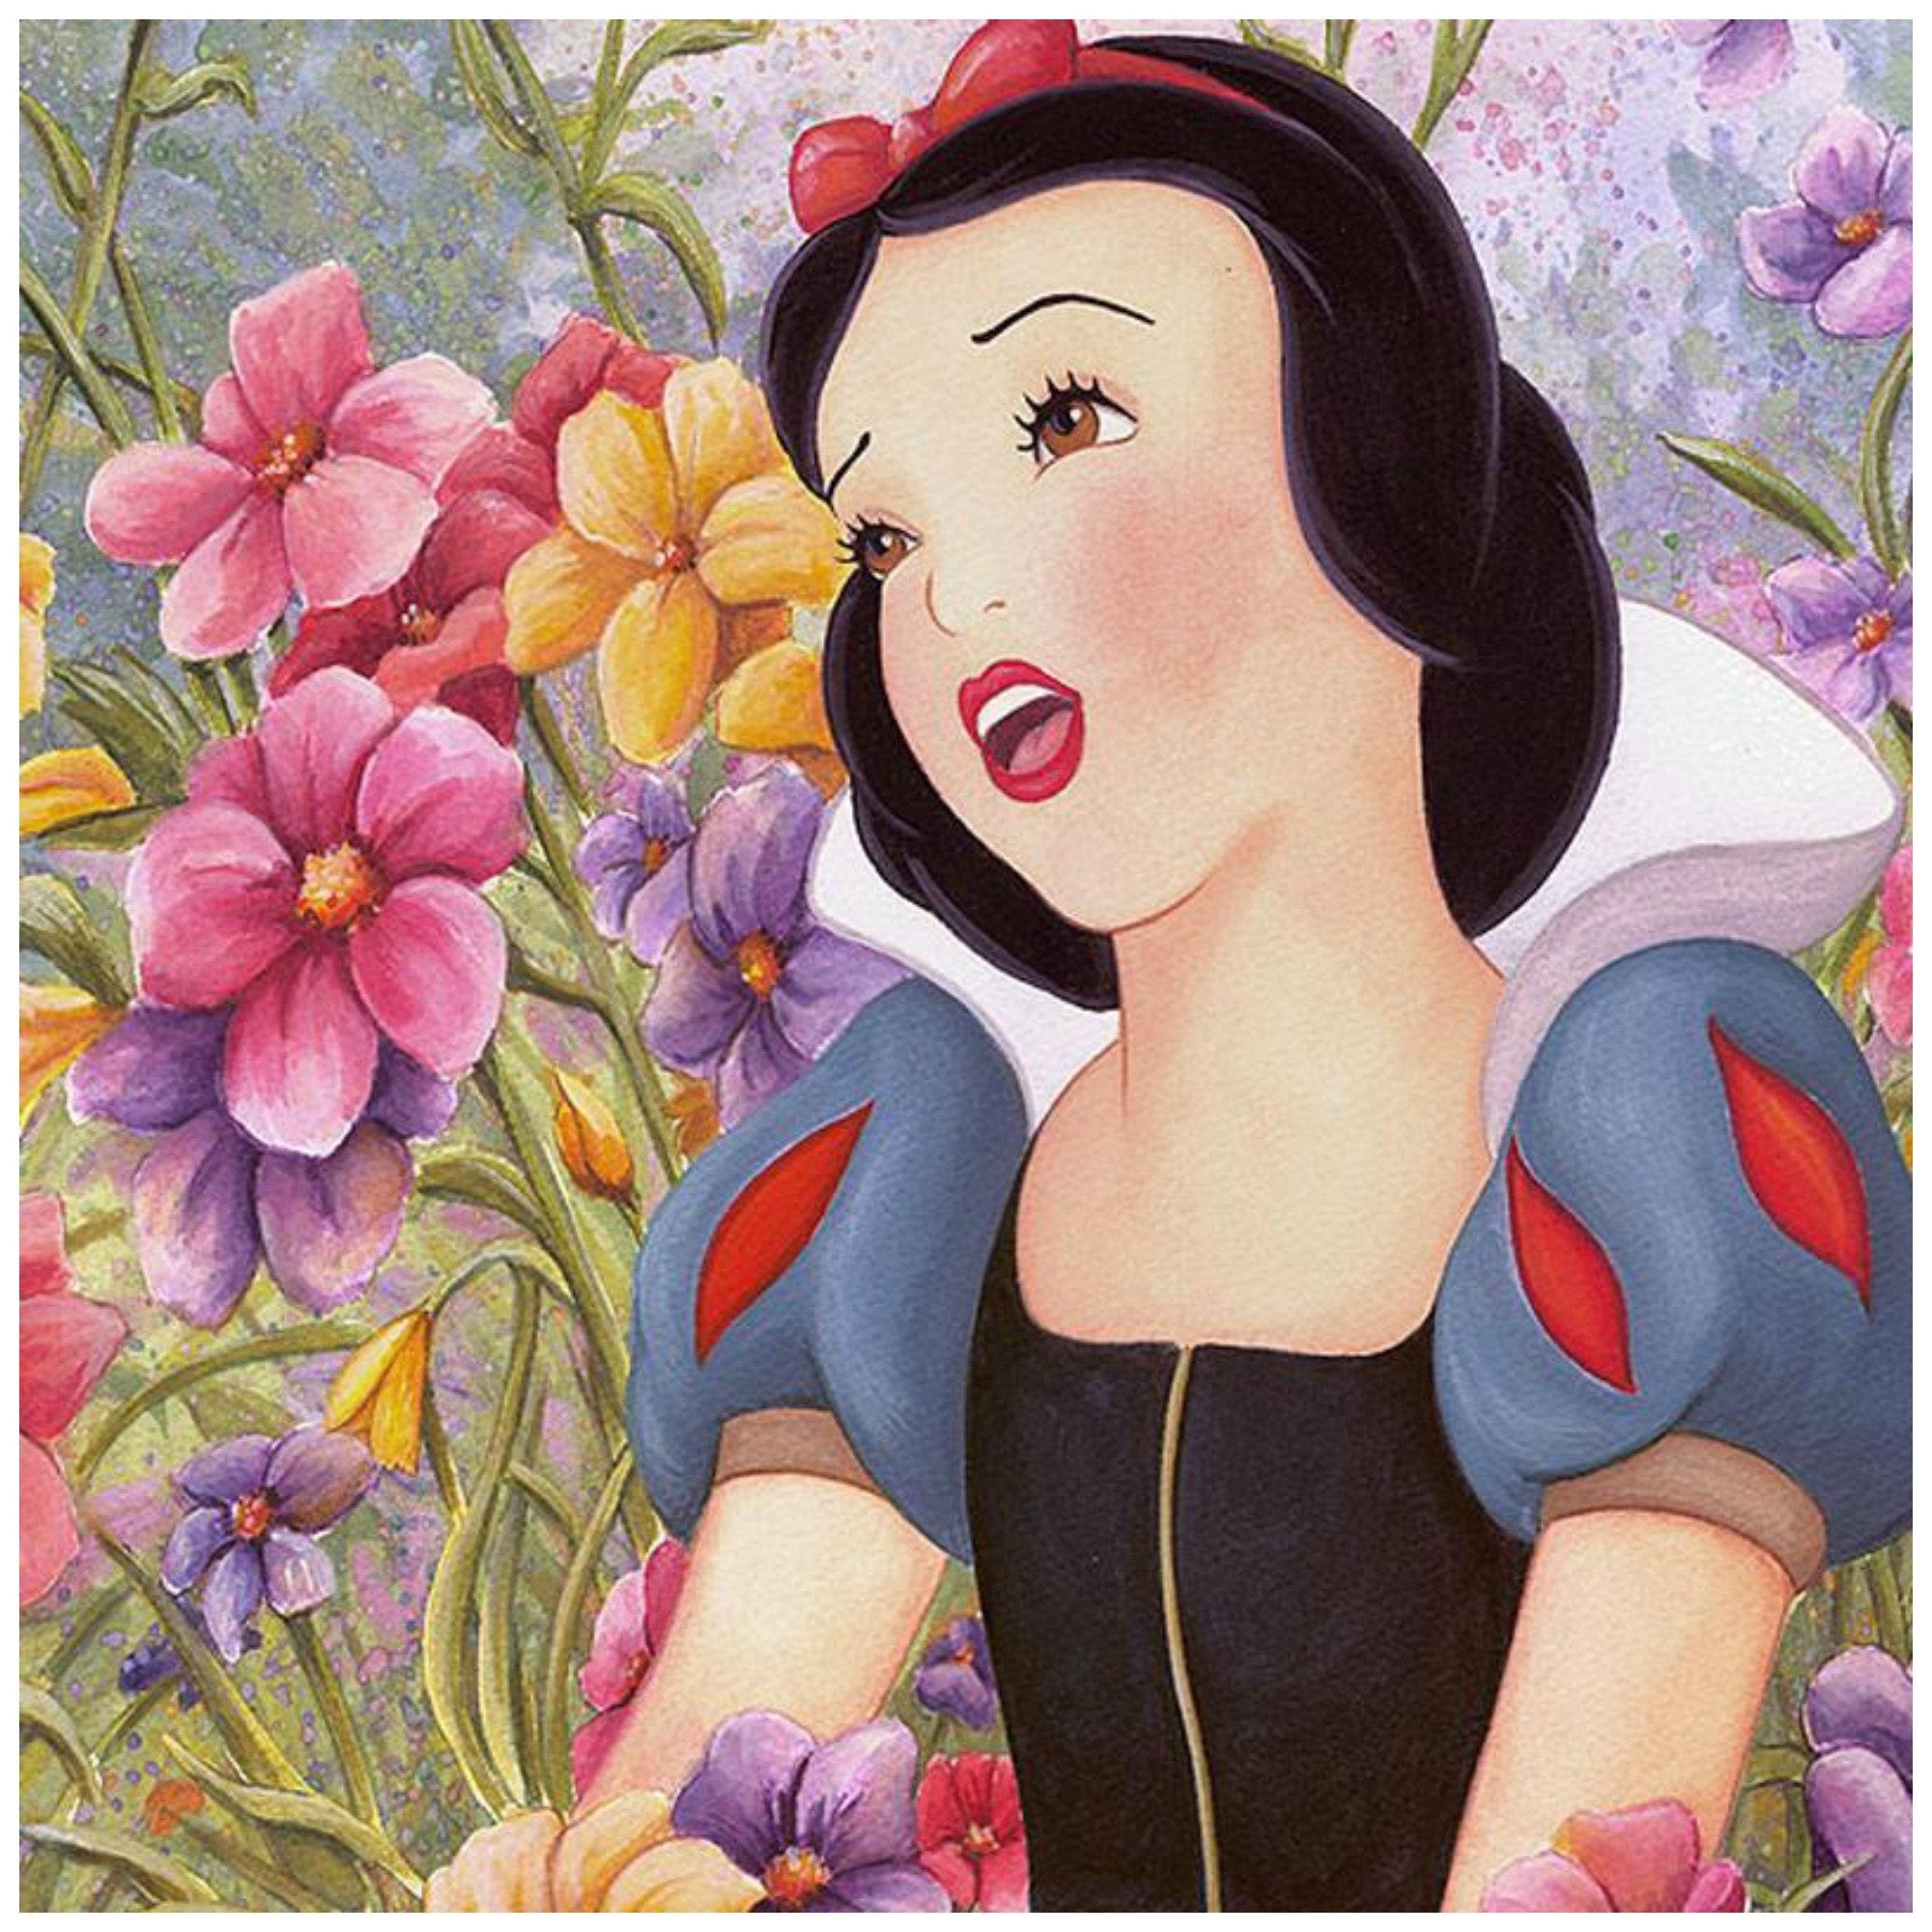 Love In Full Blossom by Michelle St. Laurent.  The beautiful Snow White singing her love songs in the garden of flowers - closeup